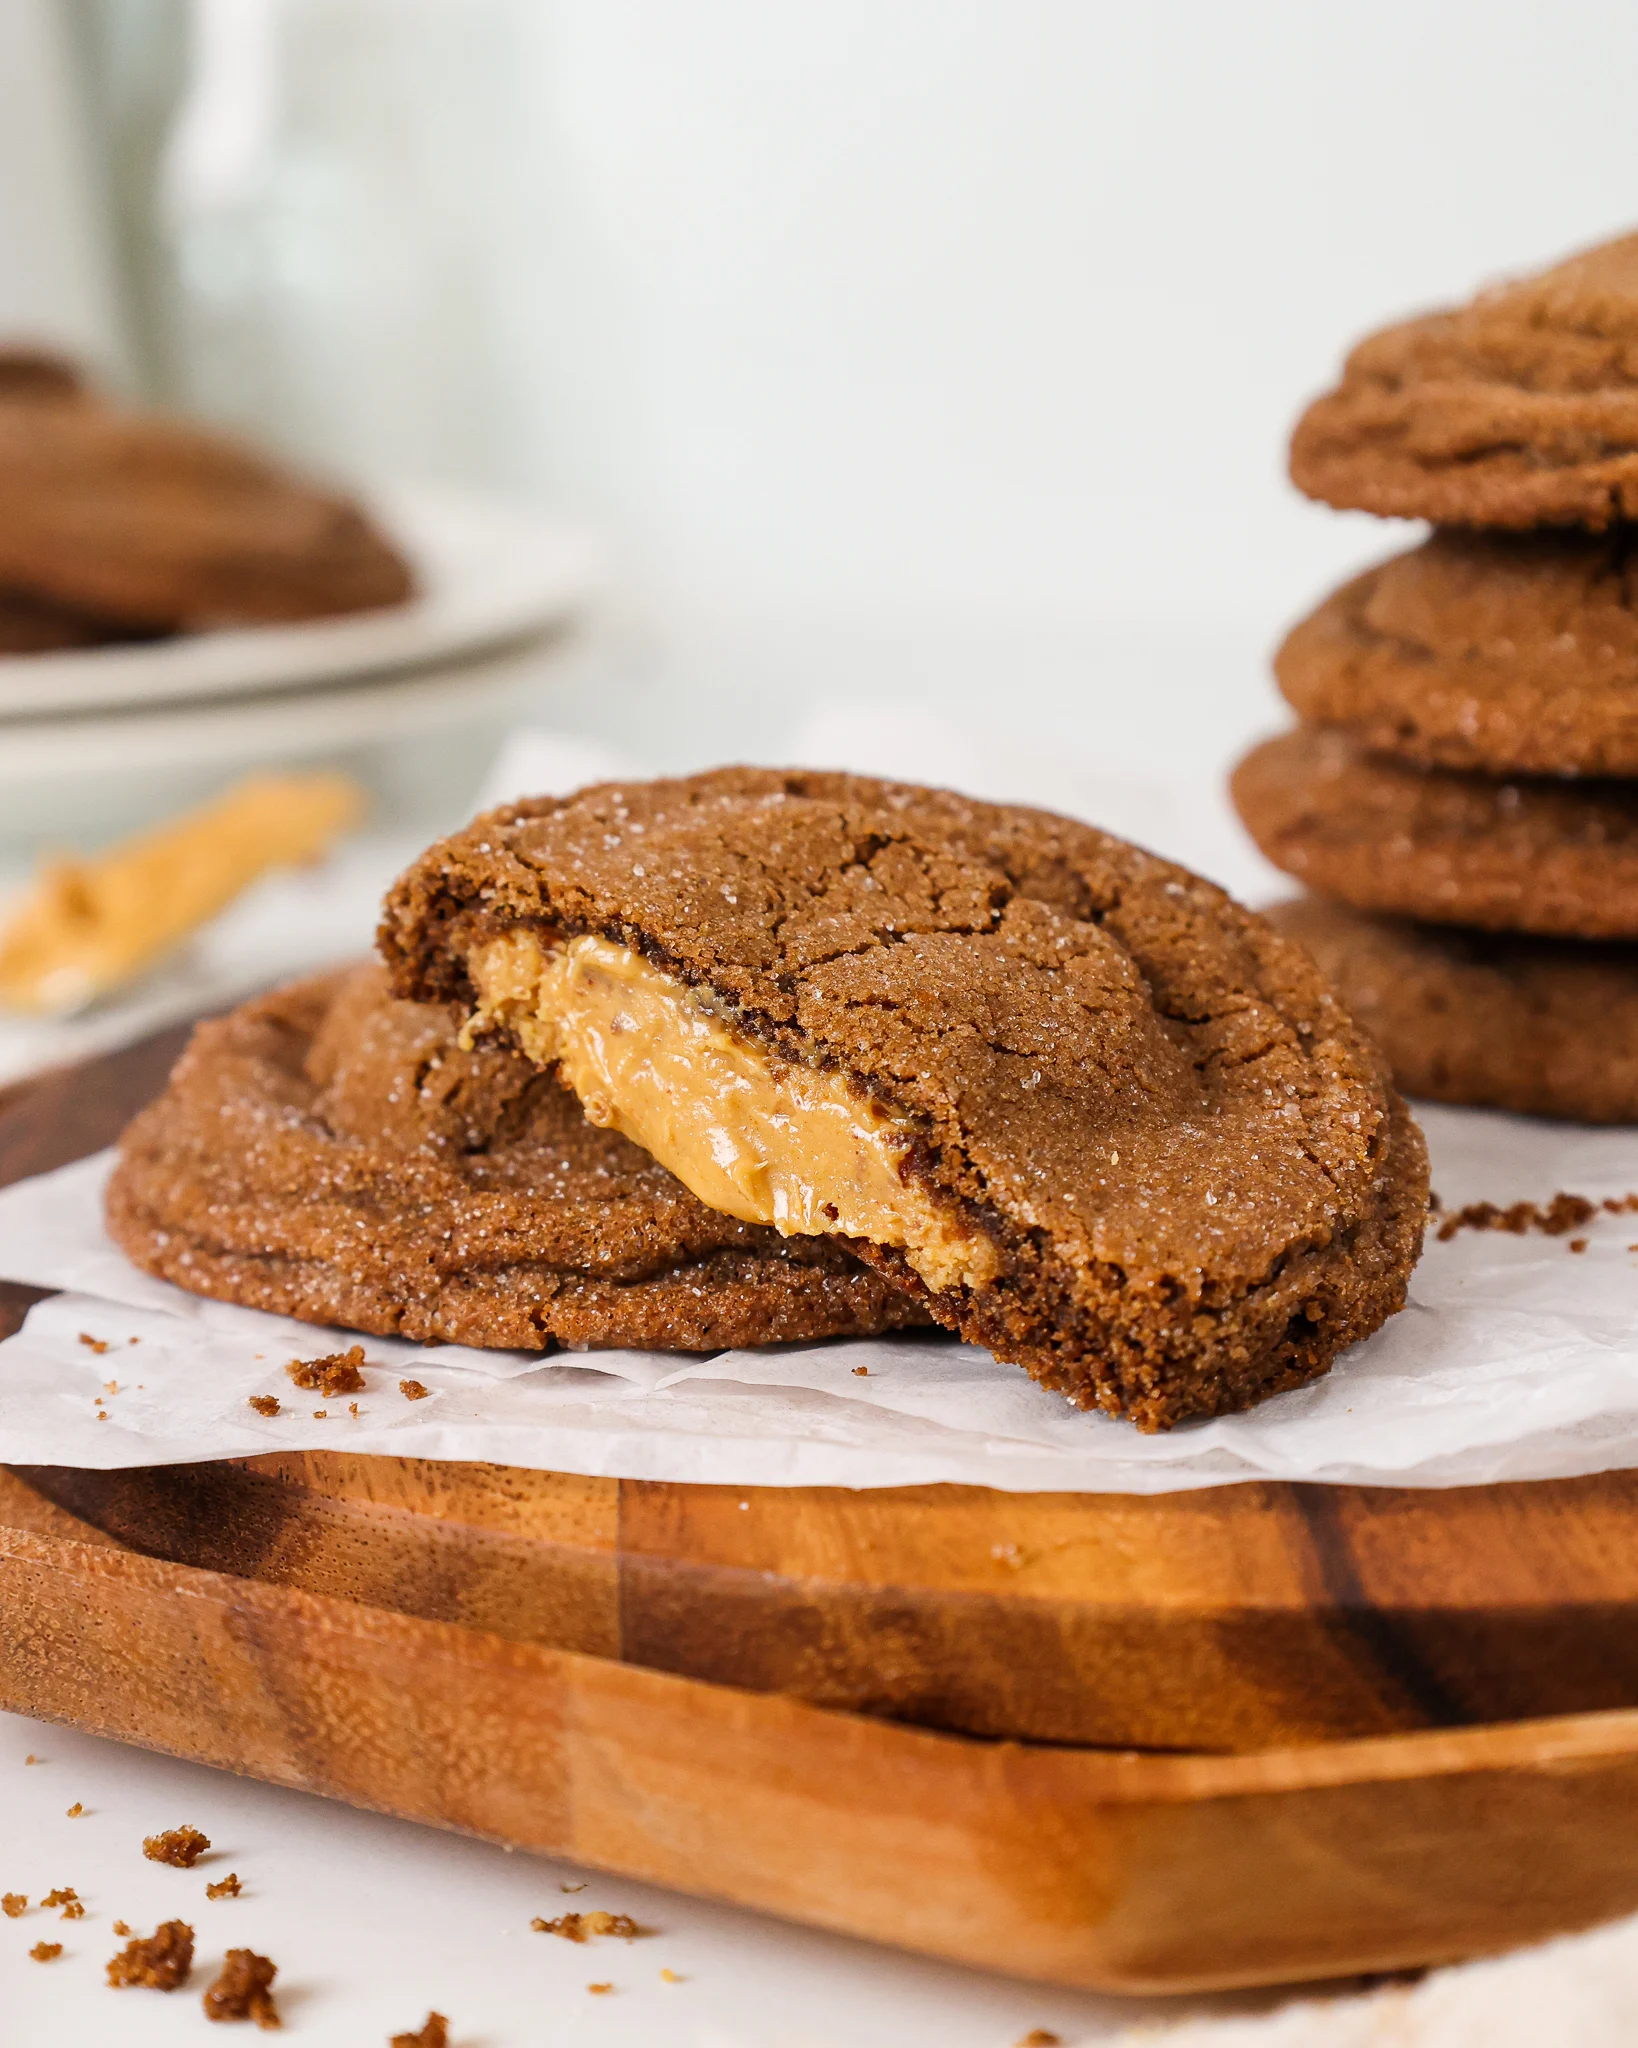 image of Peanut Butter Stuffed Chocolate Cookies that have been cut in half to show the filling